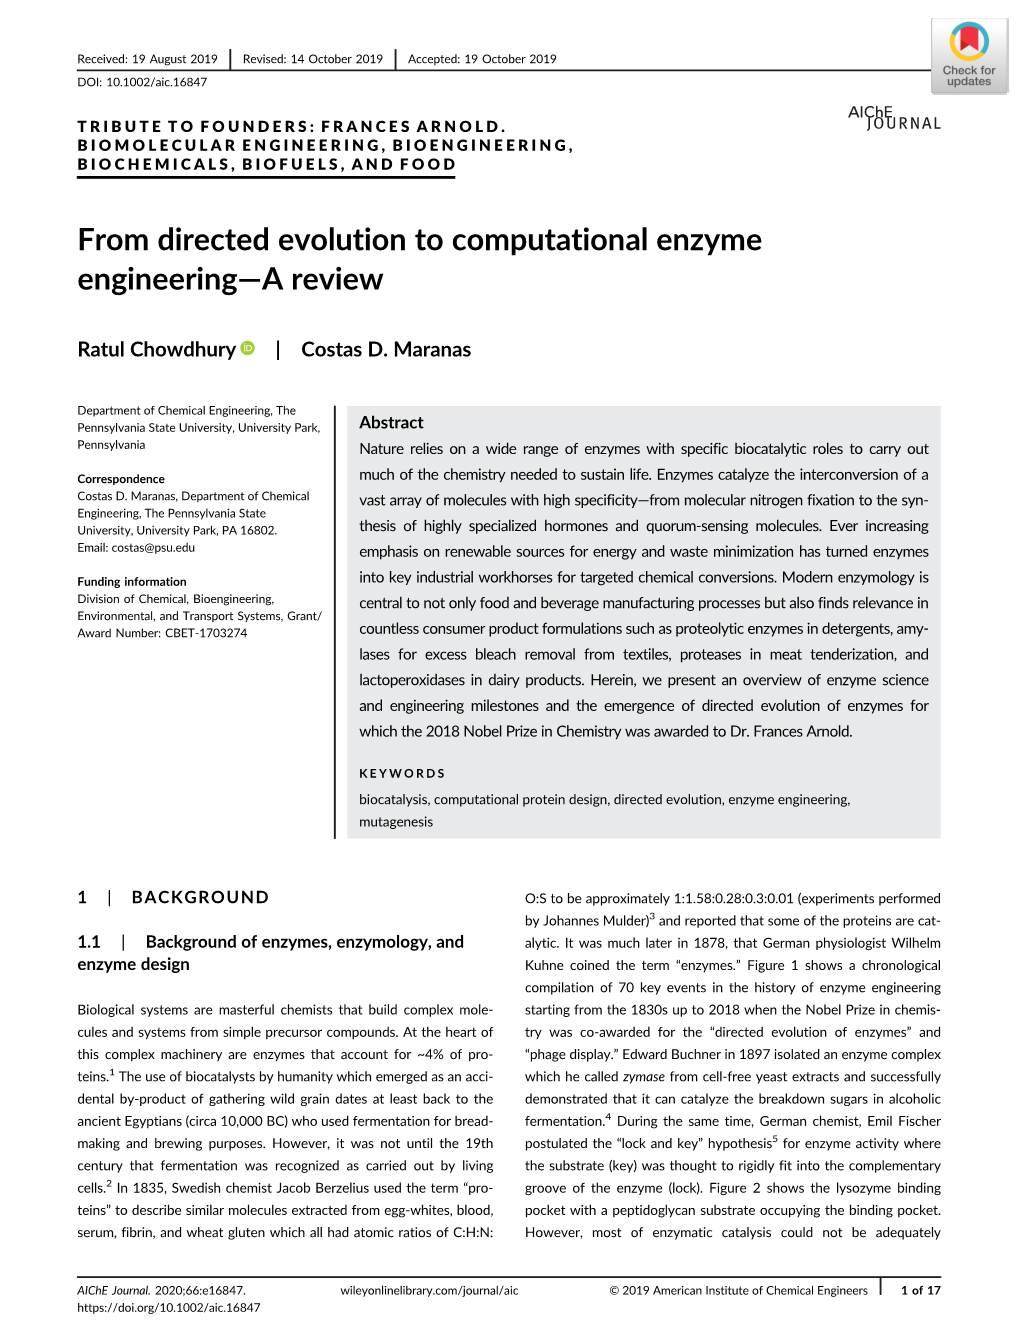 From Directed Evolution to Computational Enzyme Engineering—A Review